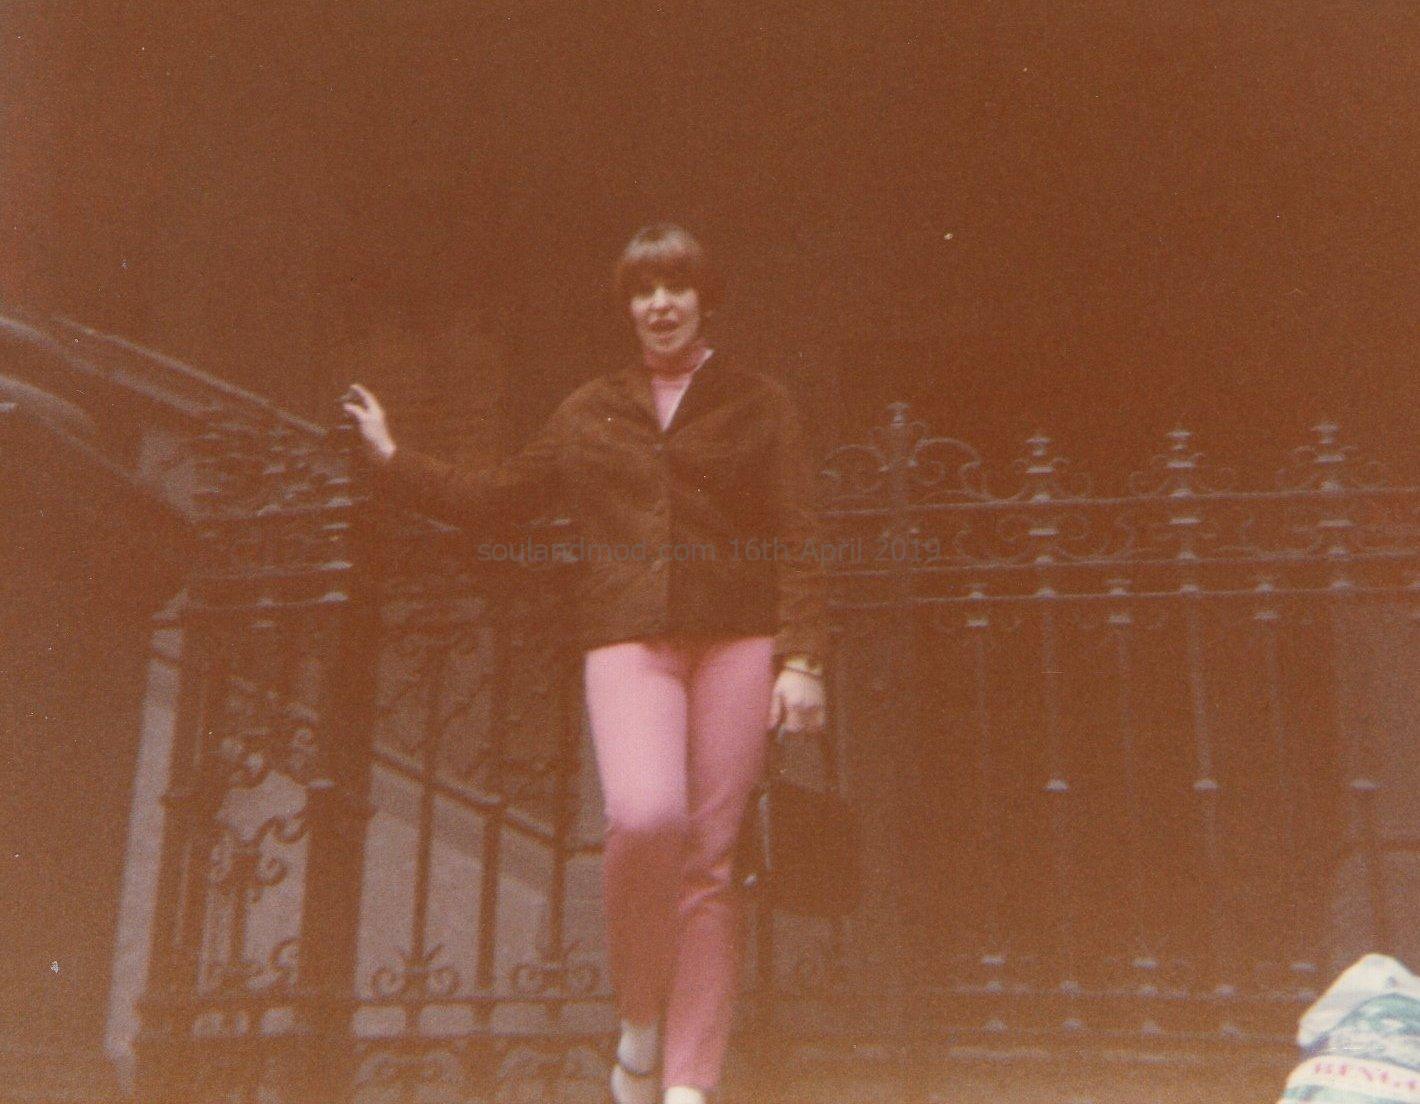 Clelia Lucchitta 1980s Mod Girl. Photo kind permission and copyright of Clelia Lucchitta